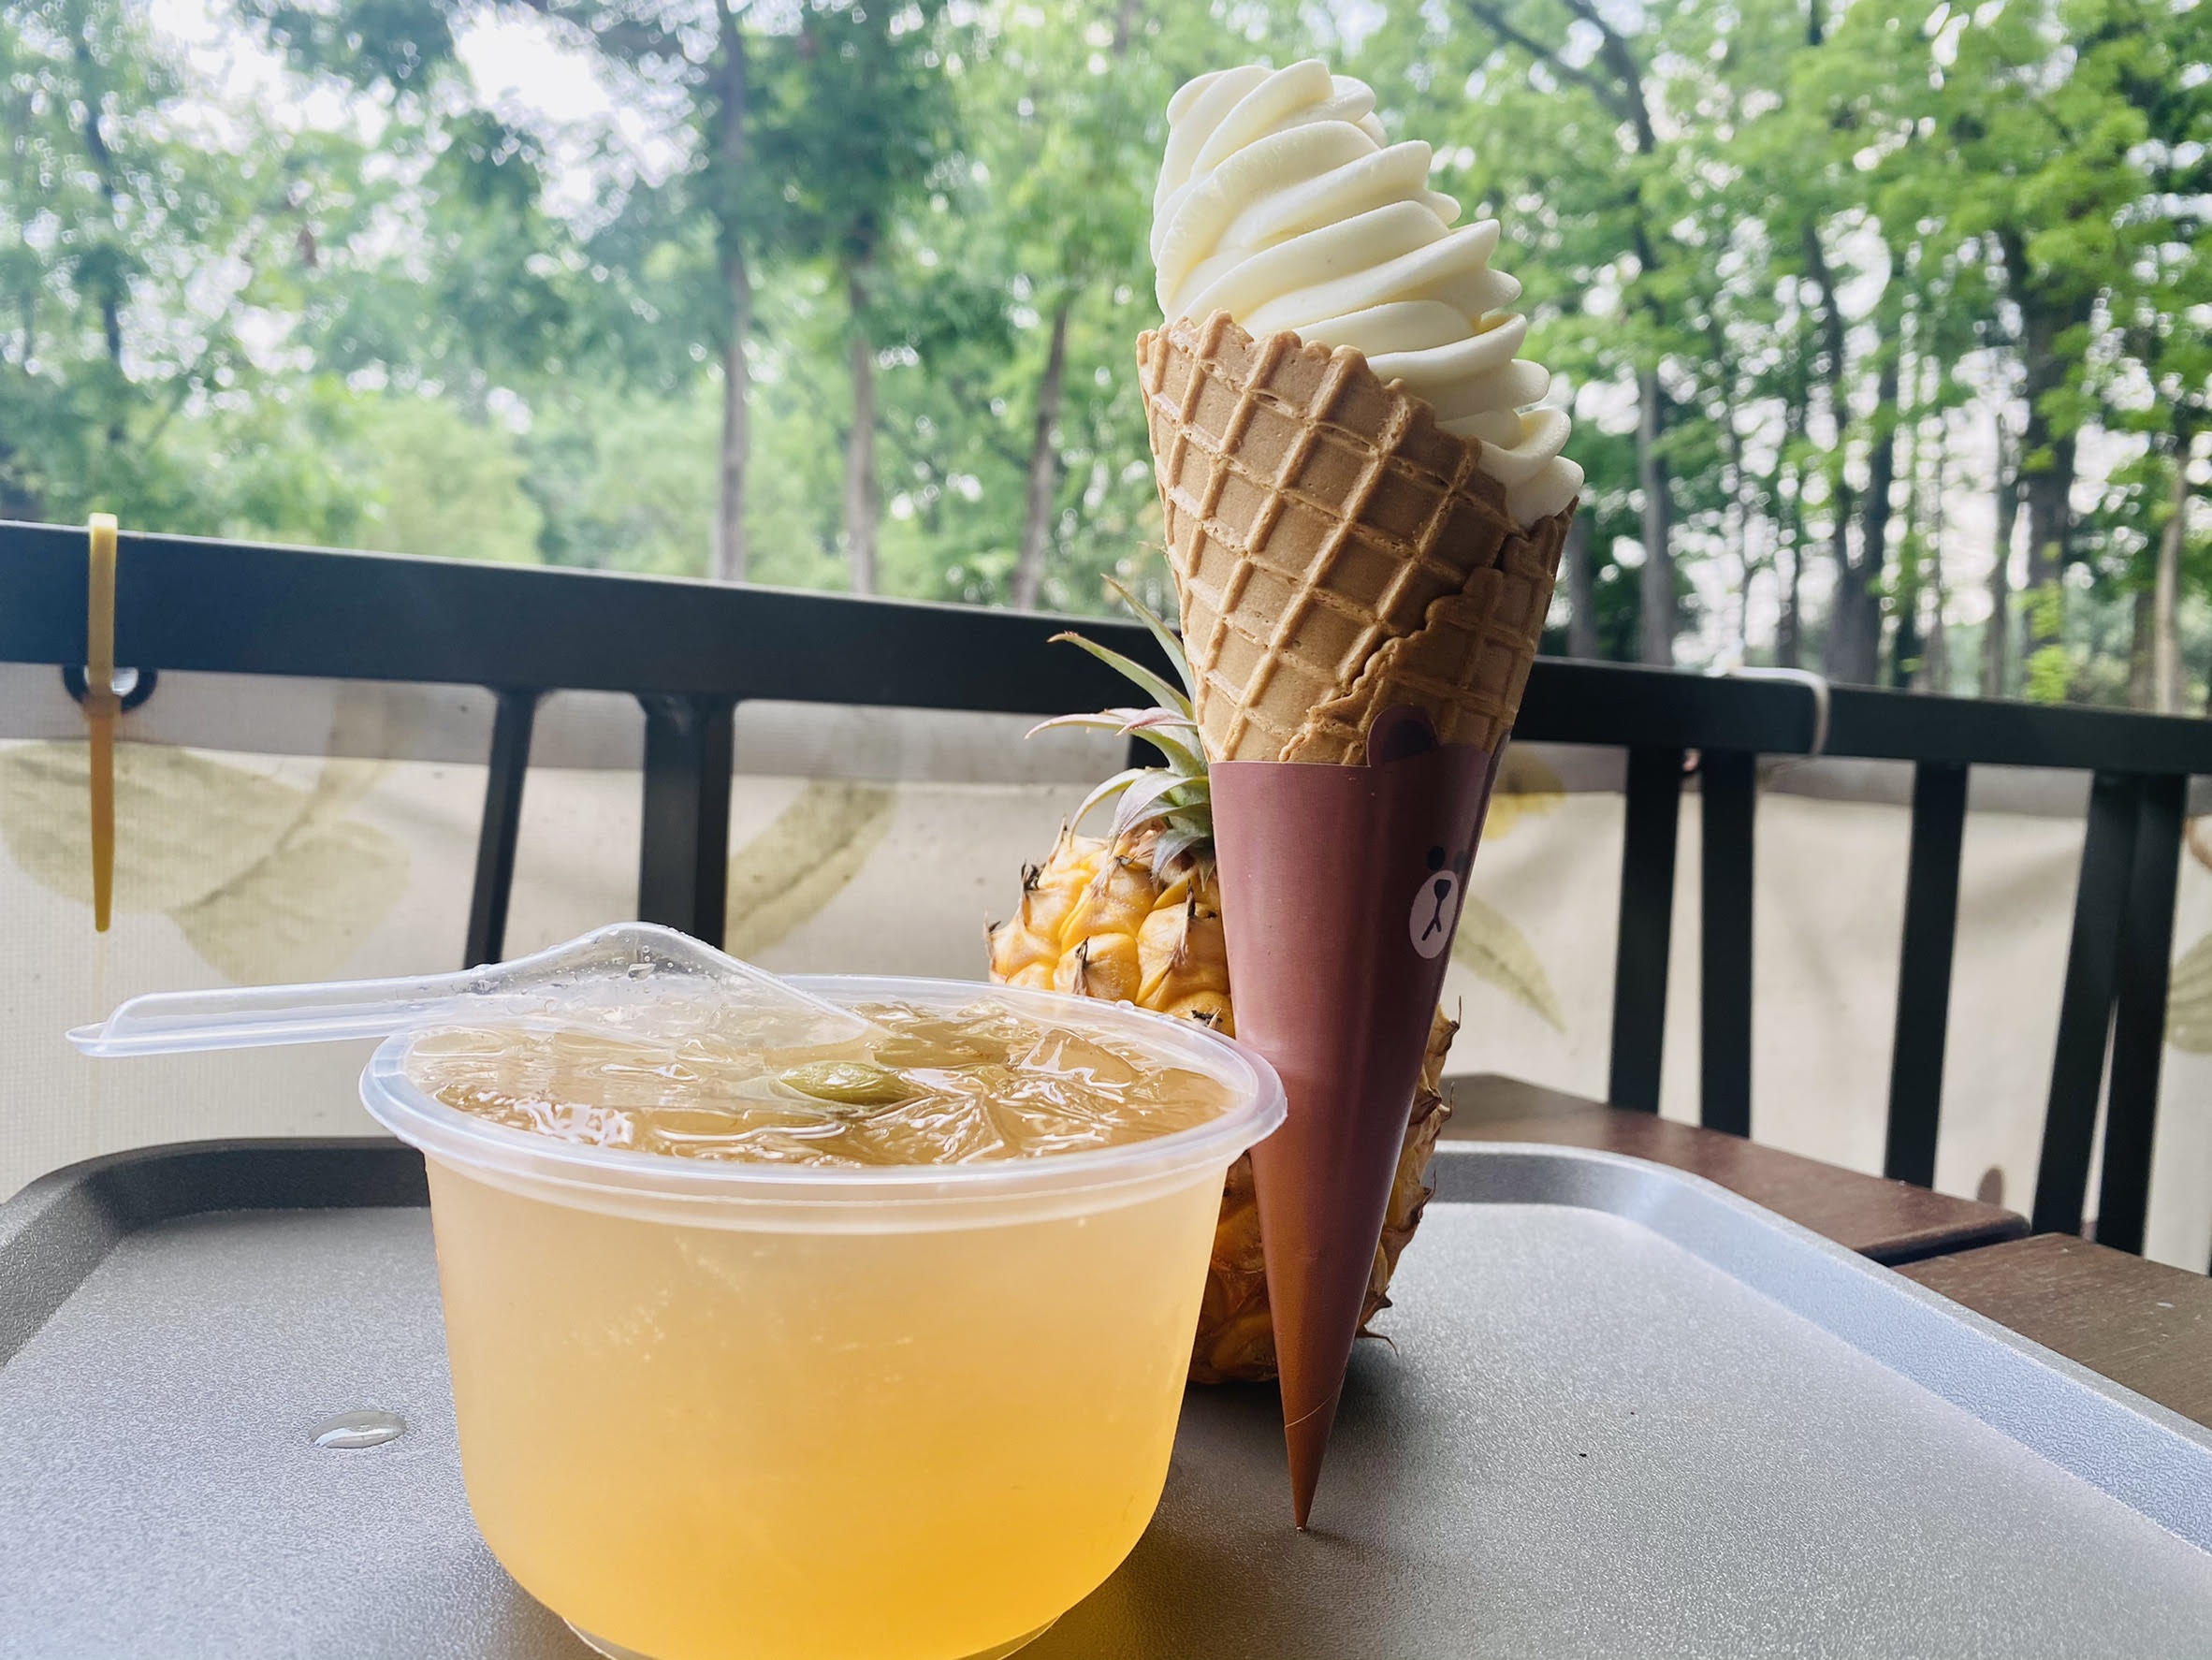 Xinwei Visitor Center will give crispy-plum aiyu jelly and fruit ice cream made with local farm produce to visitors for free.